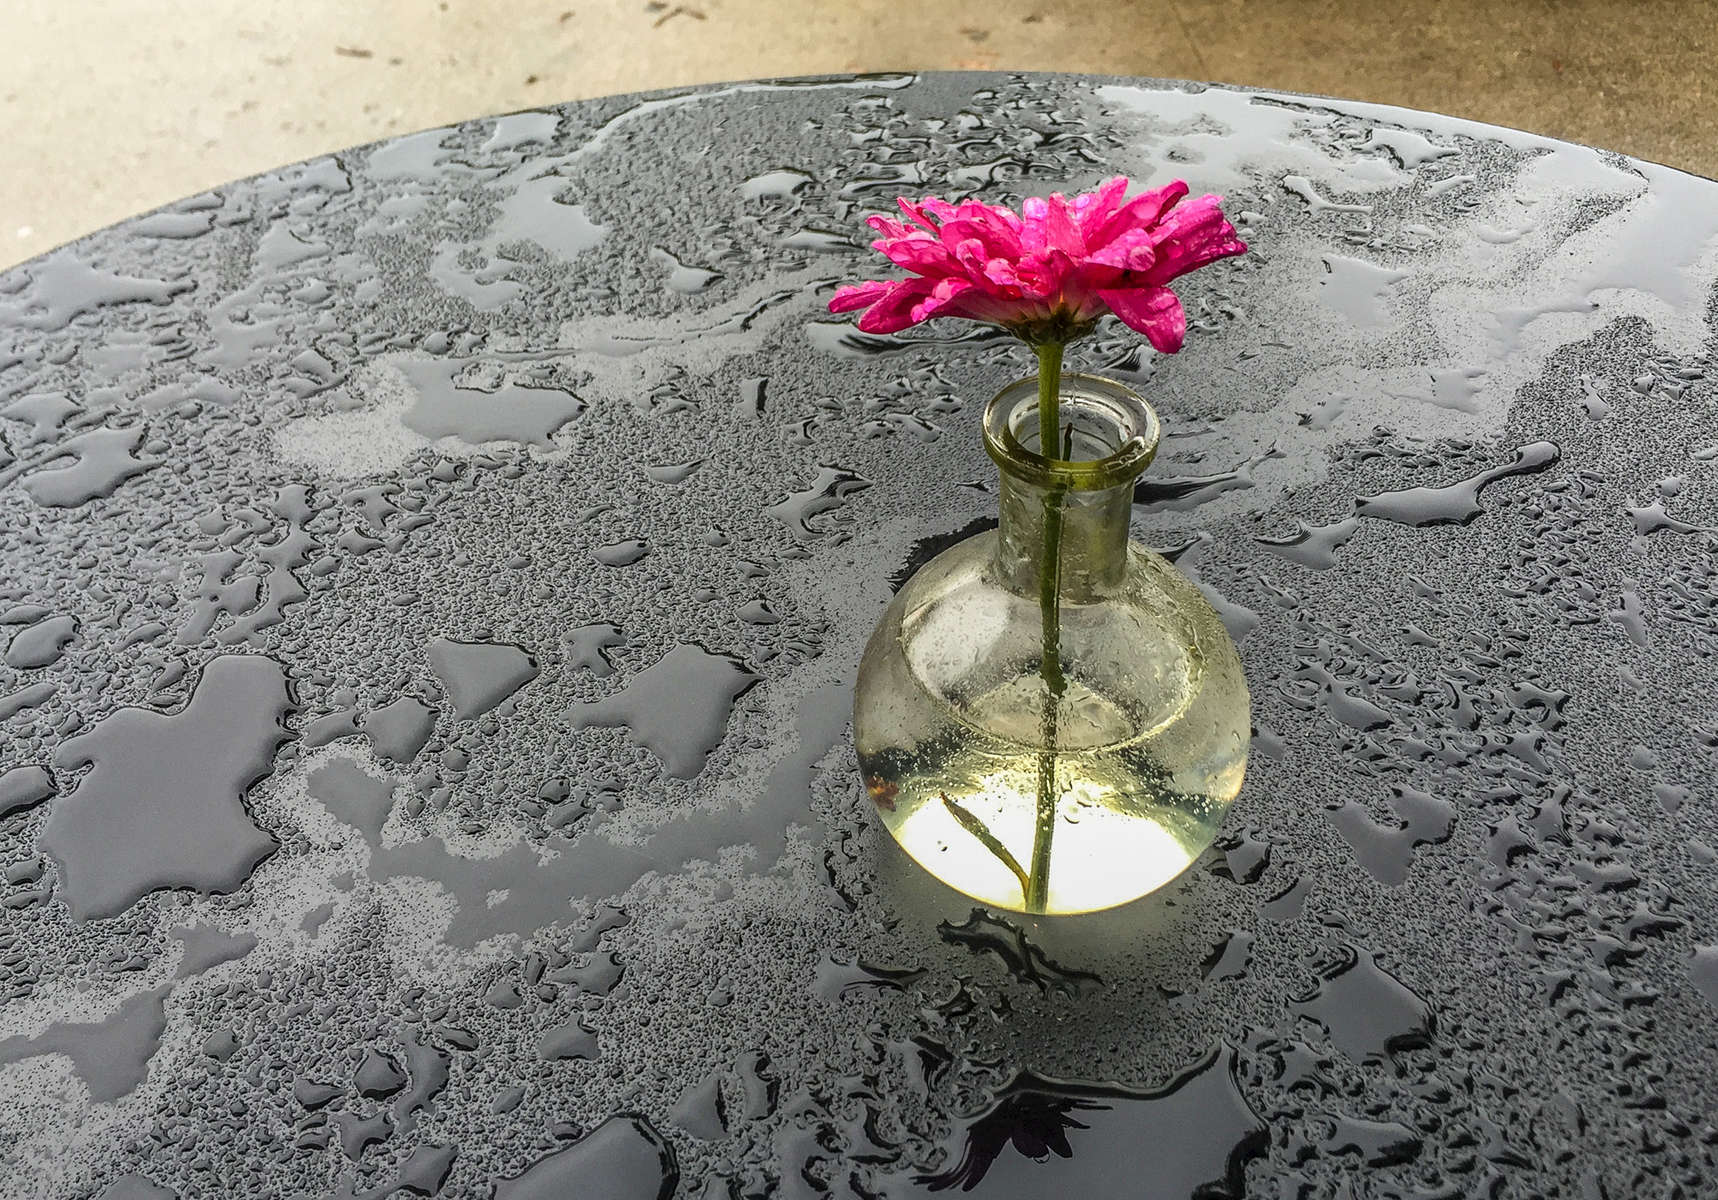 Single magenta colored flower in glass vase on wet table during rain in Santa Barbara at C'est Cheese restaurant.